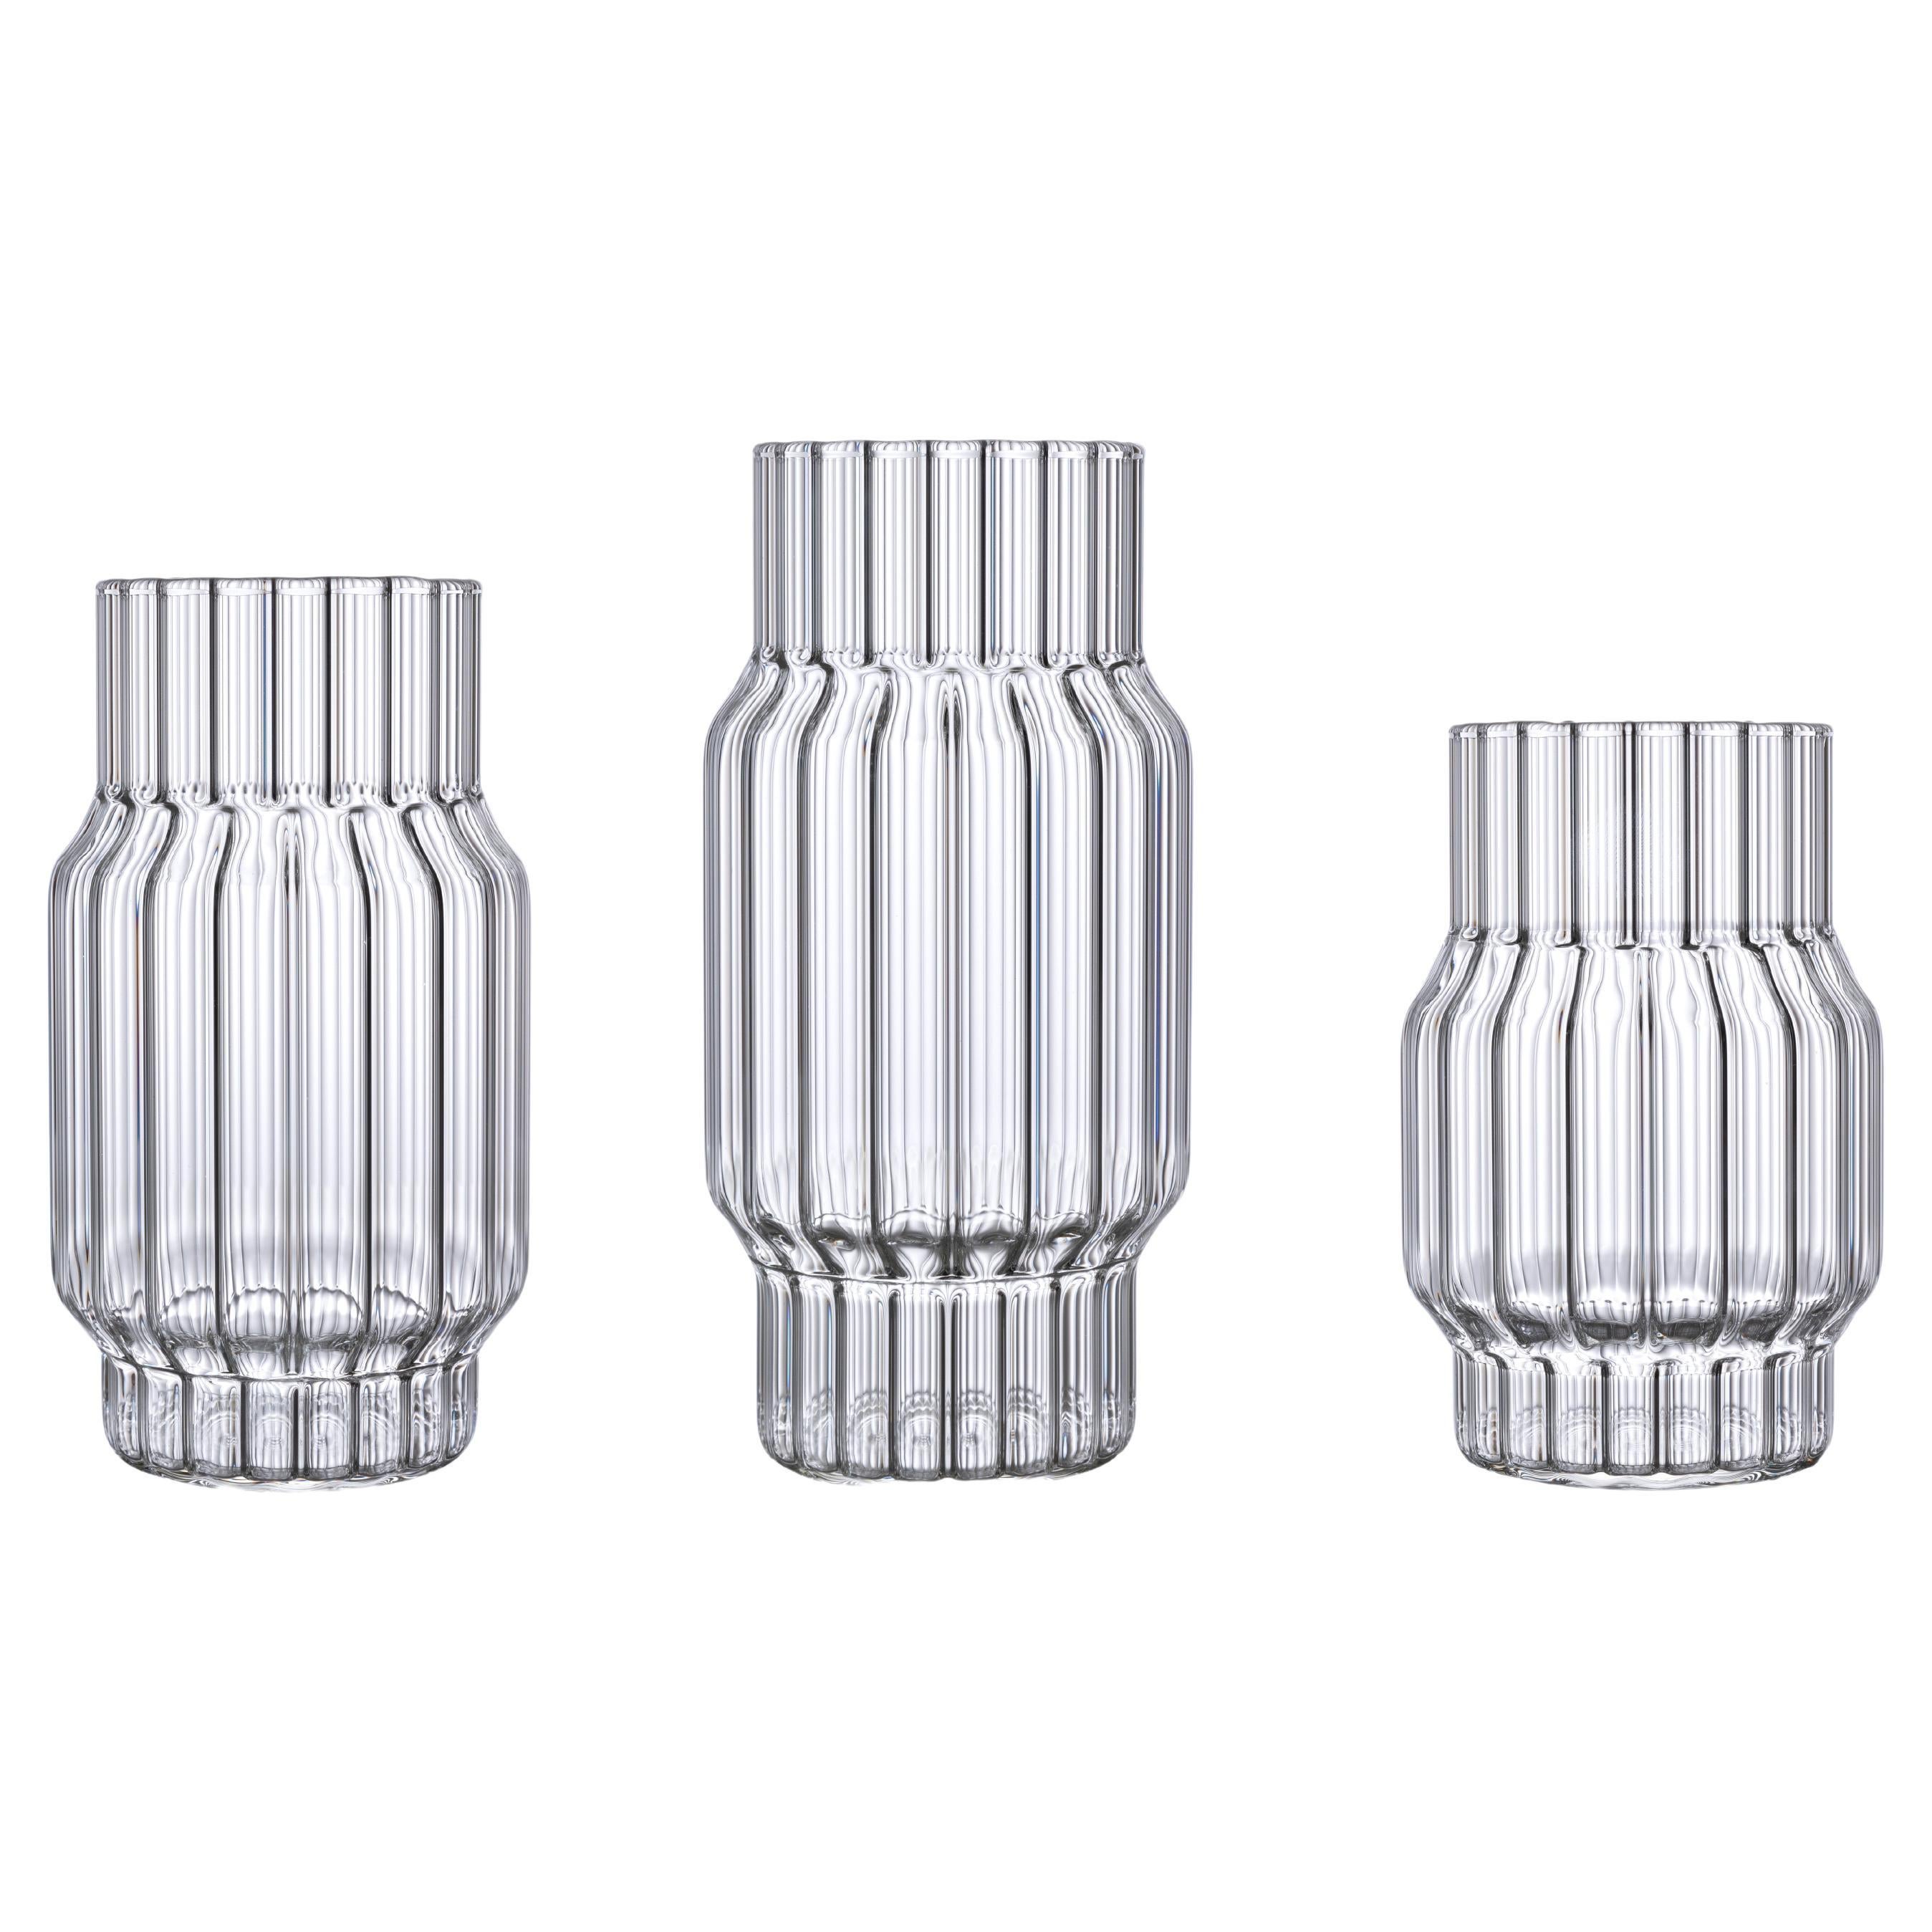 fferrone Contemporary Handcrafted Czech Fluted Glass Vases Set of 3 For Sale